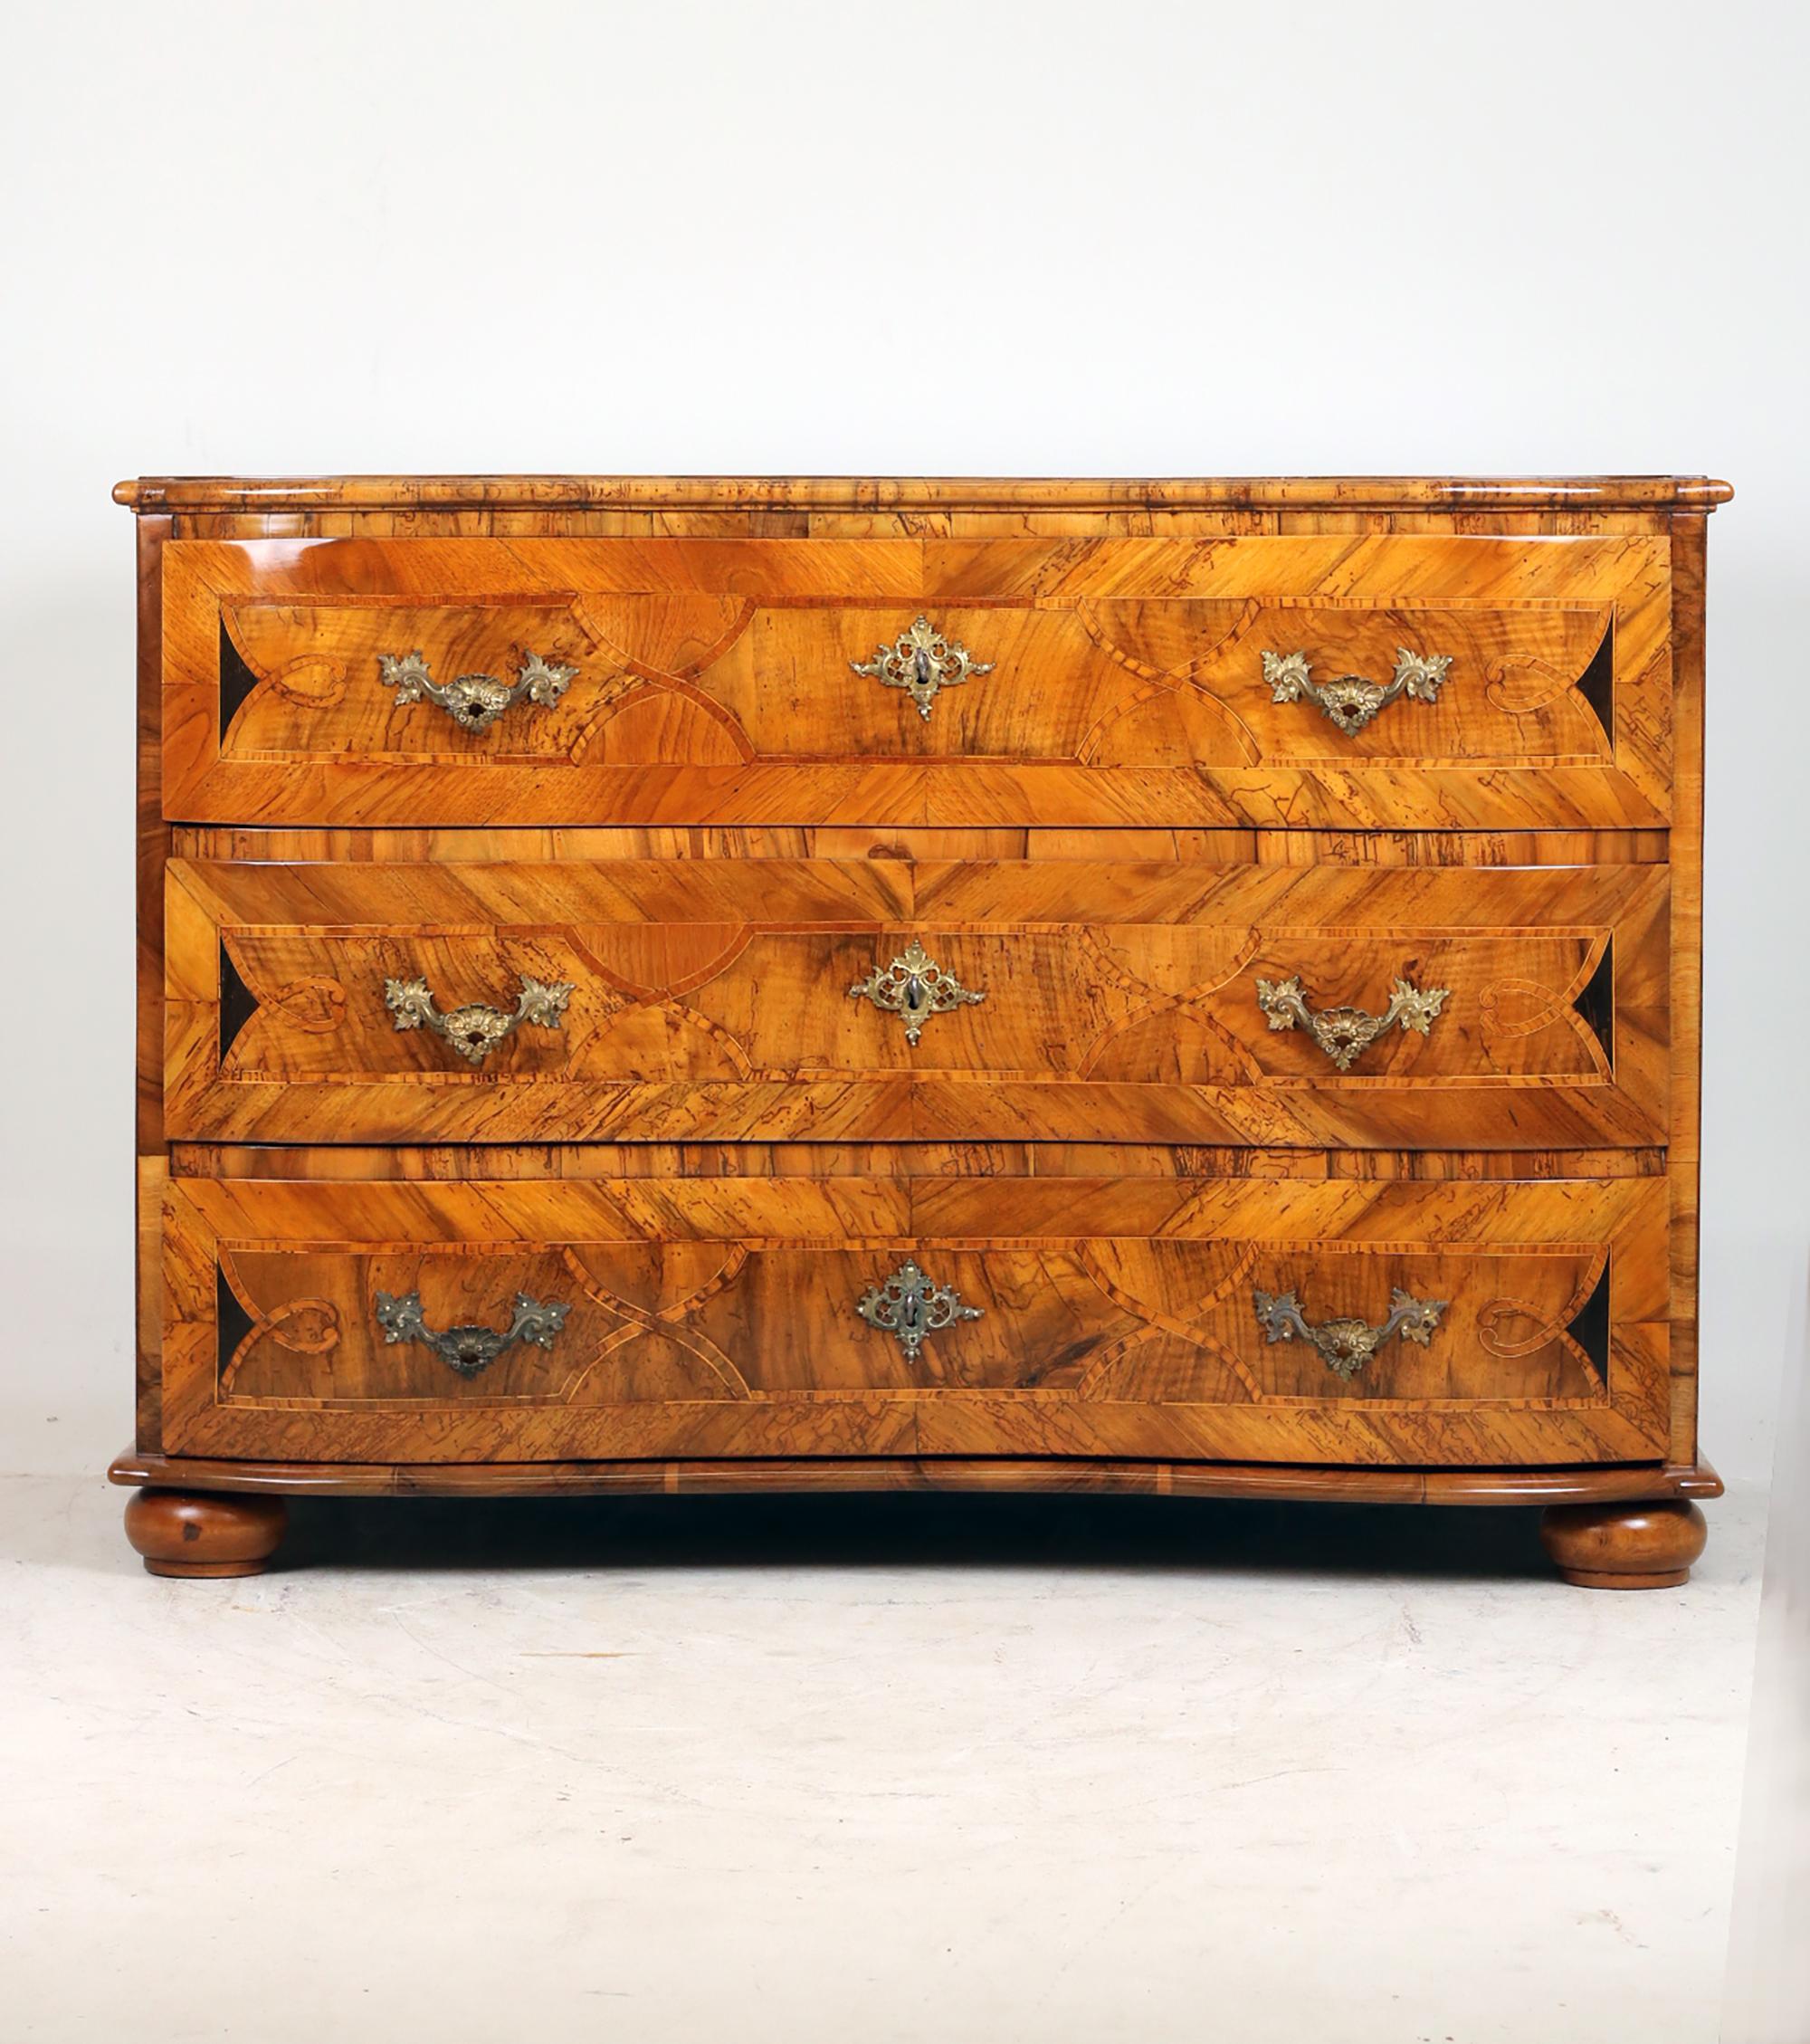 Baroque Chest of Drawers,
Ca. 1760 

Original chest of drawers veneered in walnut, very beautiful inlays in maple and plum, wonderful eye-catcher, 3 curved drawers inlaid, 3 compartments fielded, beautiful bandwork, original fittings, box locks, 3